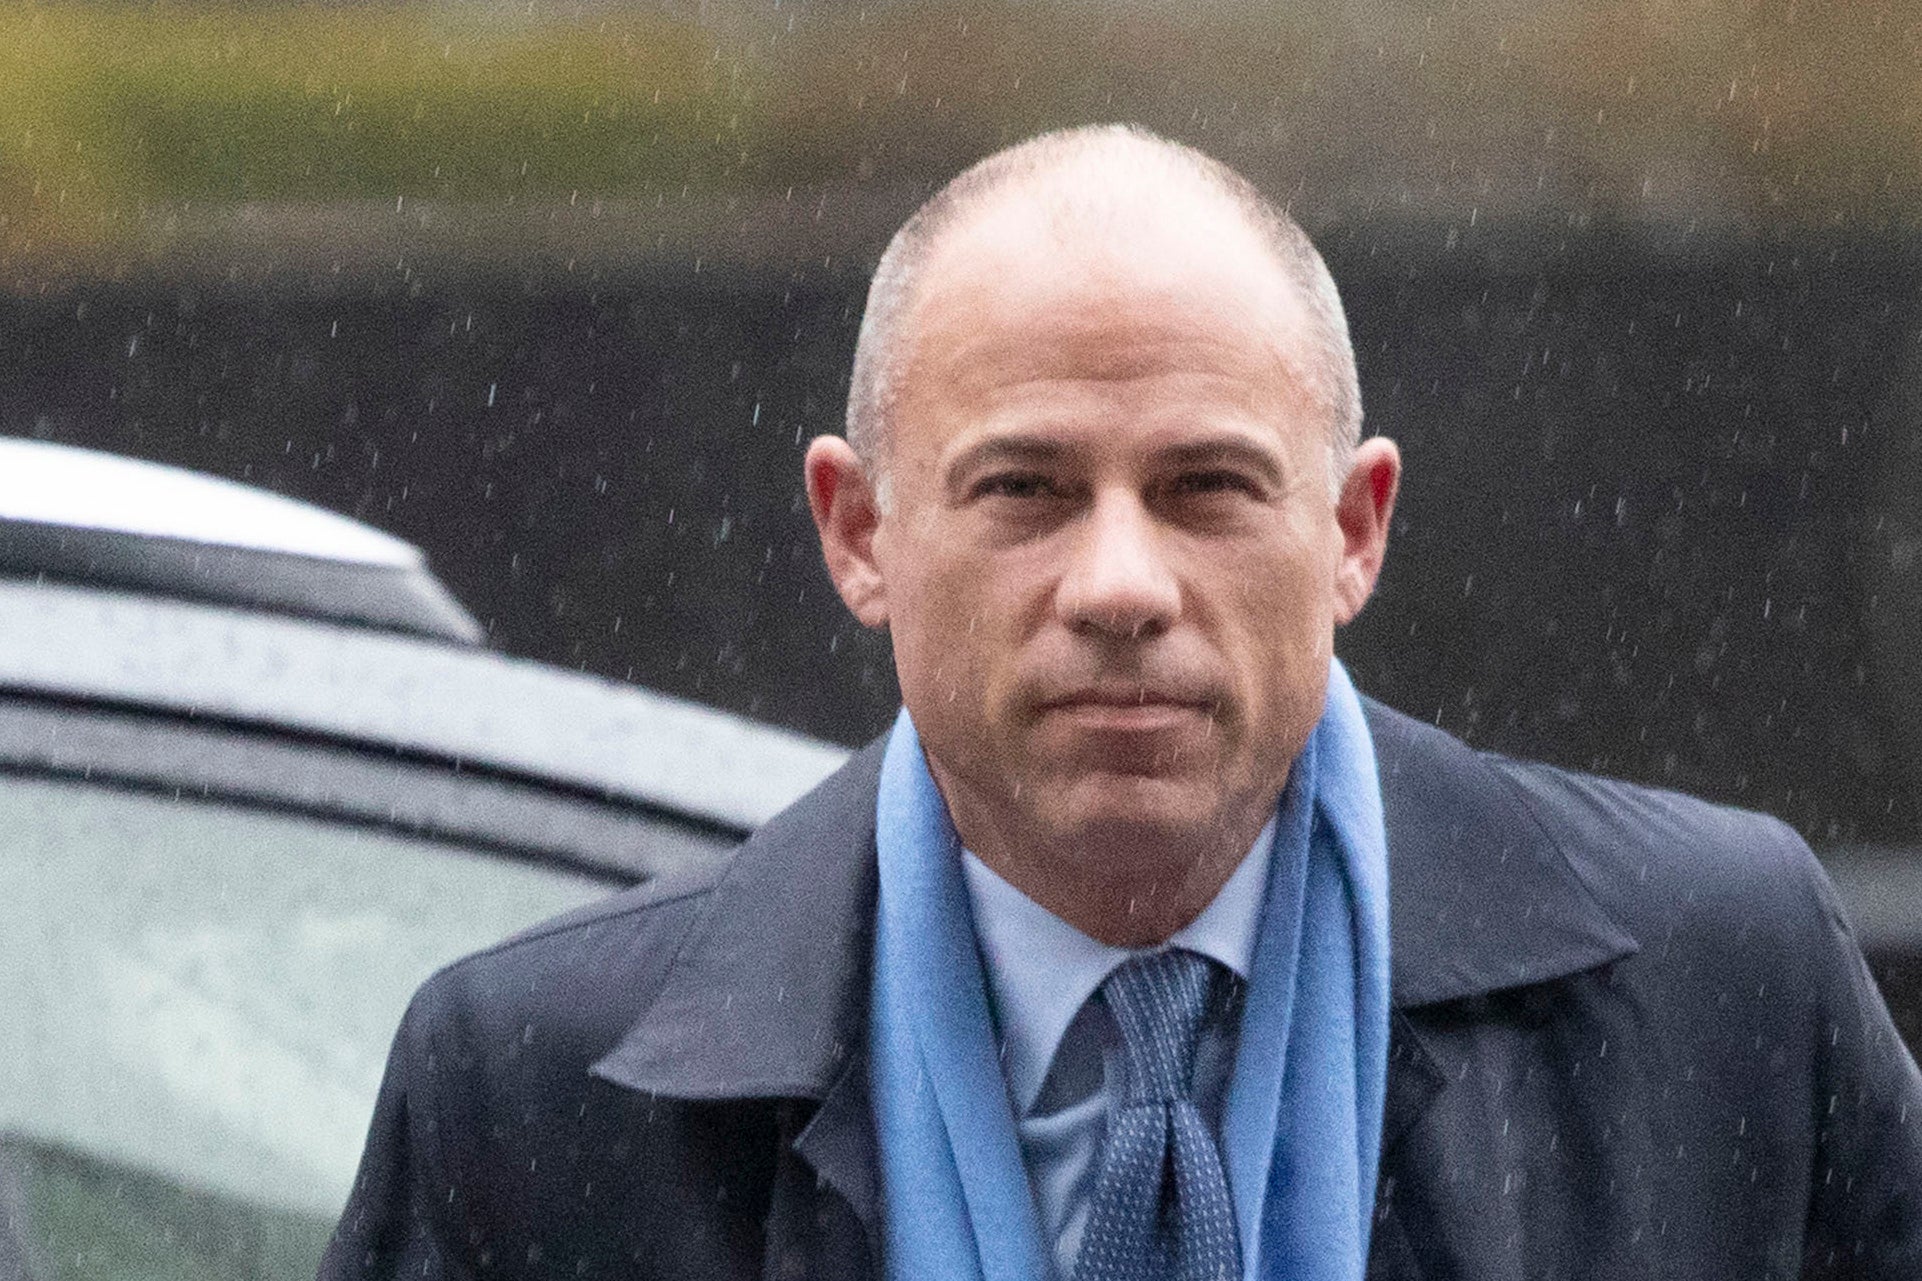 April trial scheduled for Avenatti over Stormy Daniels book charges ...